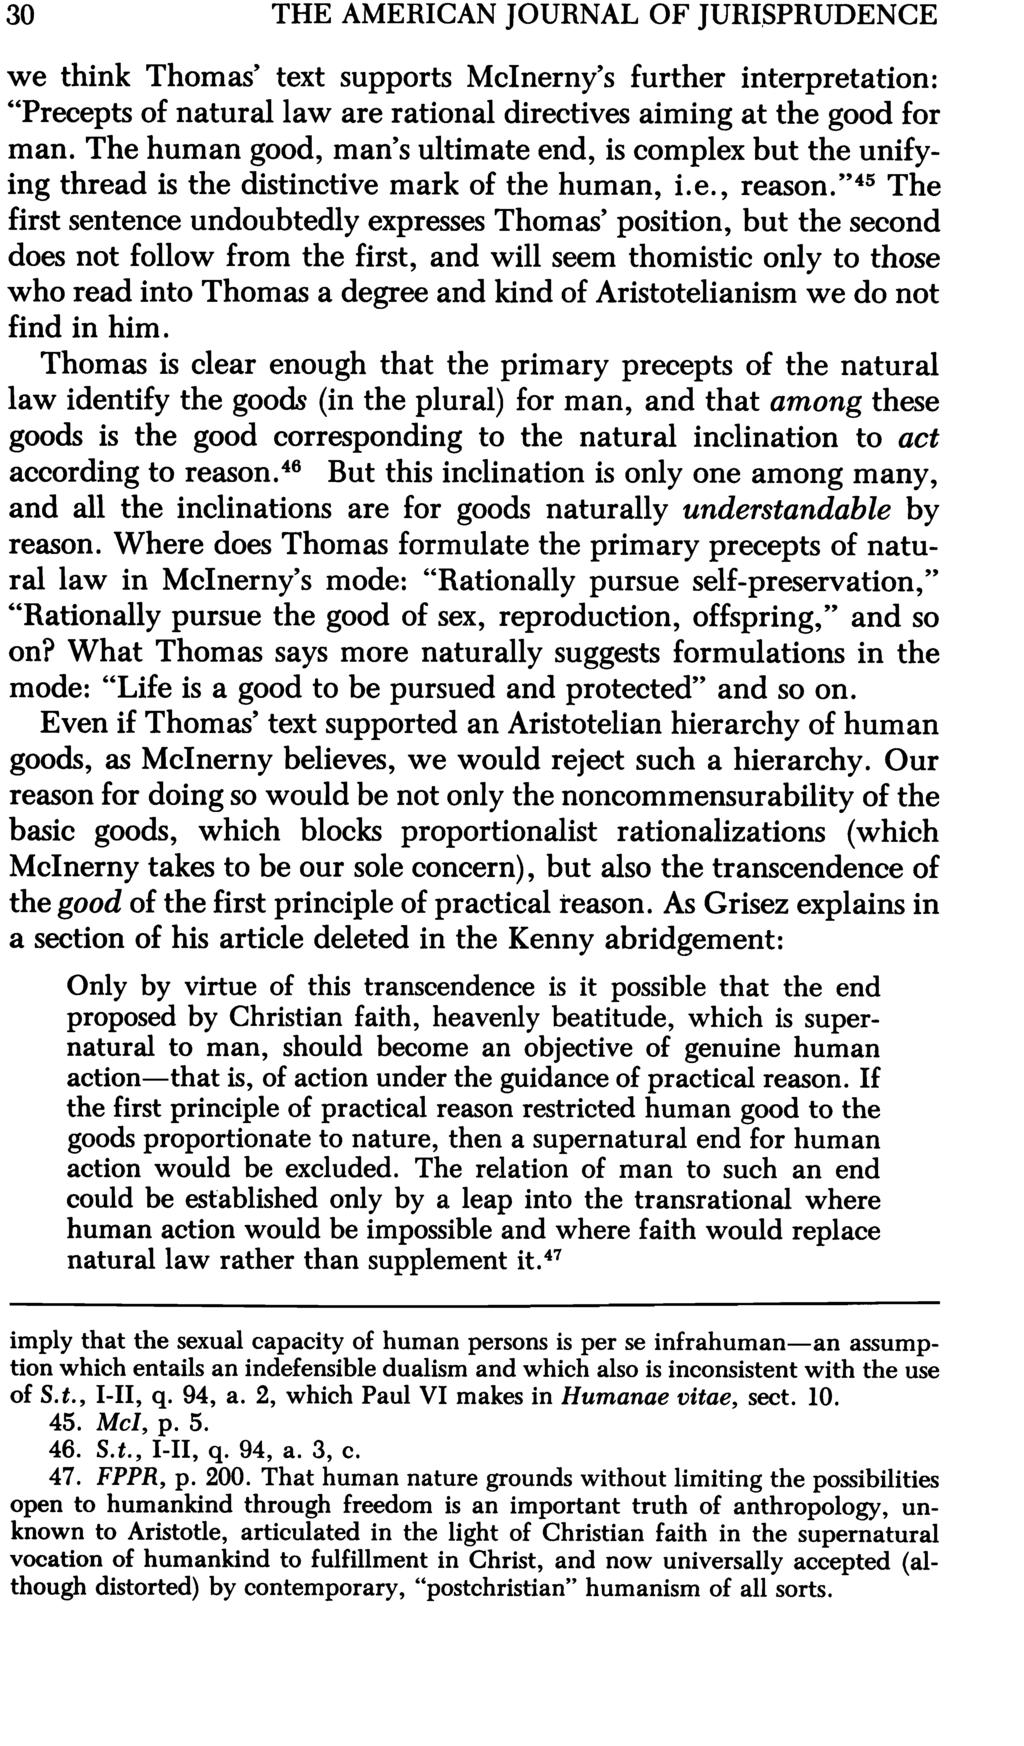 30 THE AMERICAN JOURNAL OF JURISPRUDENCE we think Thomas' text supports McInerny's further interpretation: "Precepts of natural law are rational directives aiming at the good for man.